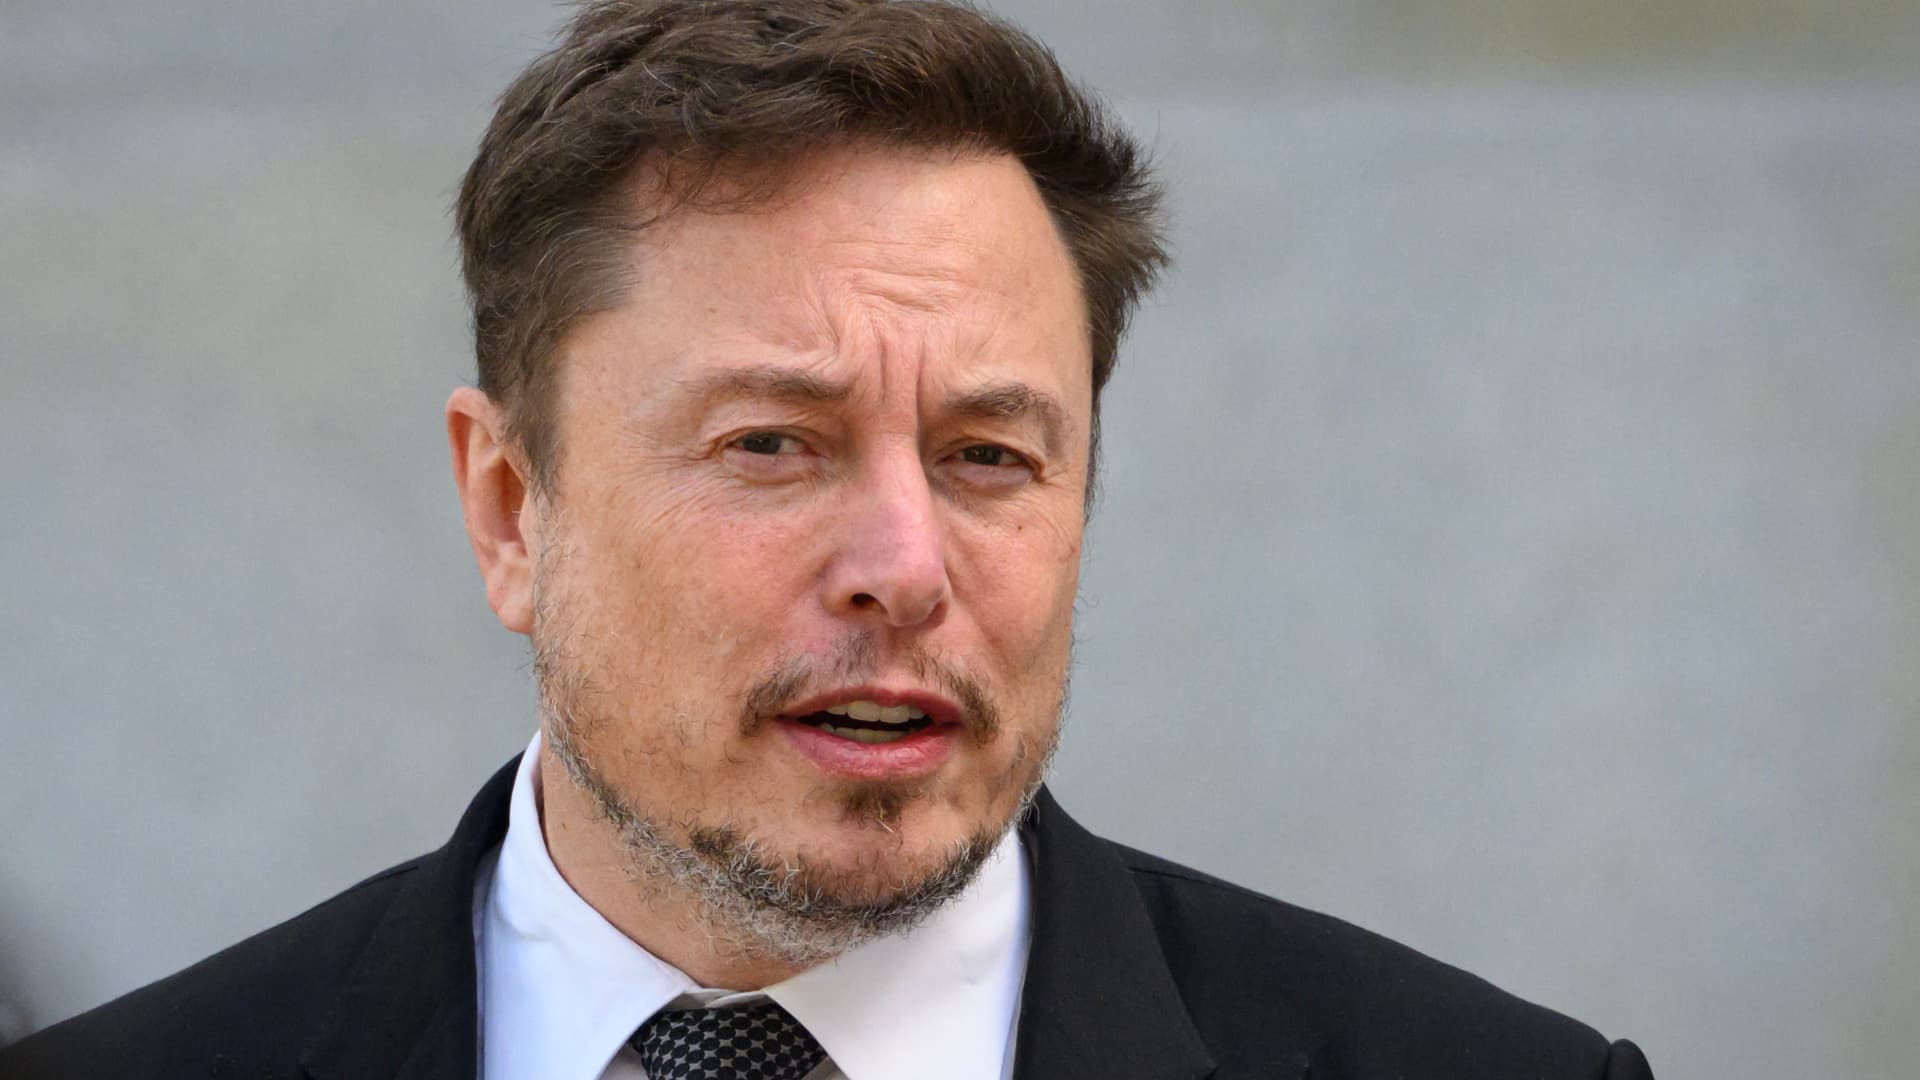 Elon Musk warned about misinformation, violent content on X by EU